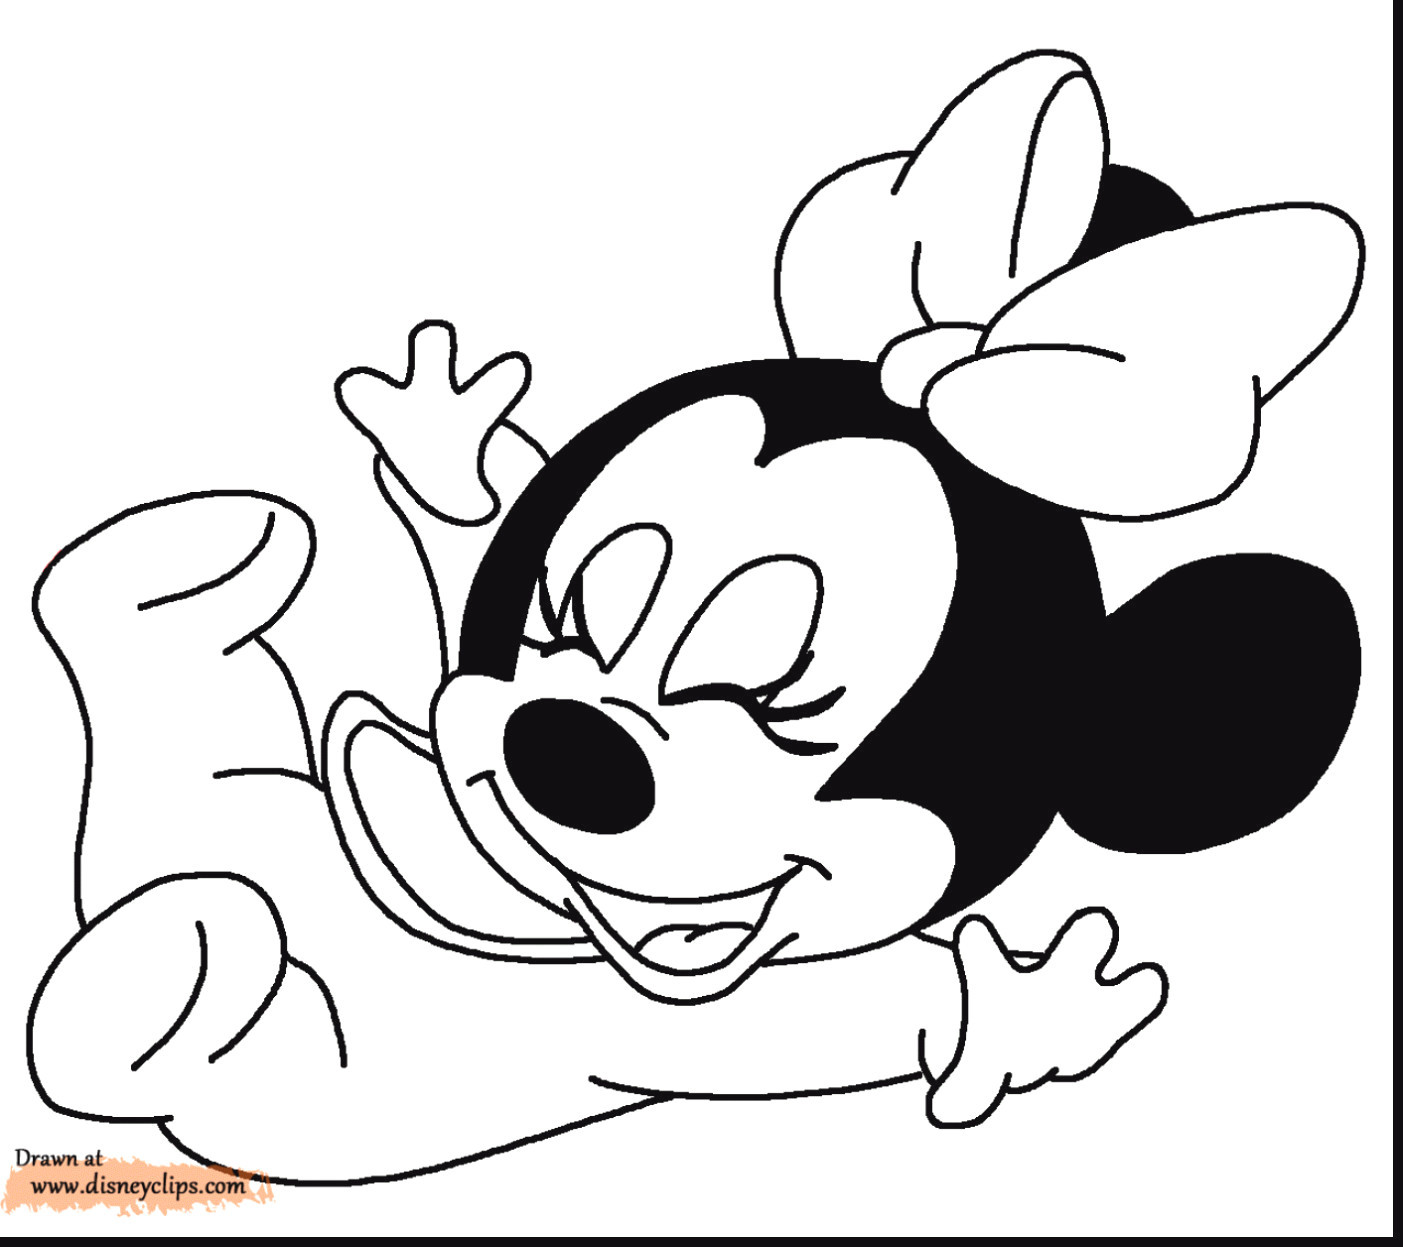 Minnie Mouse Coloring Pages - HD Wallpaper 